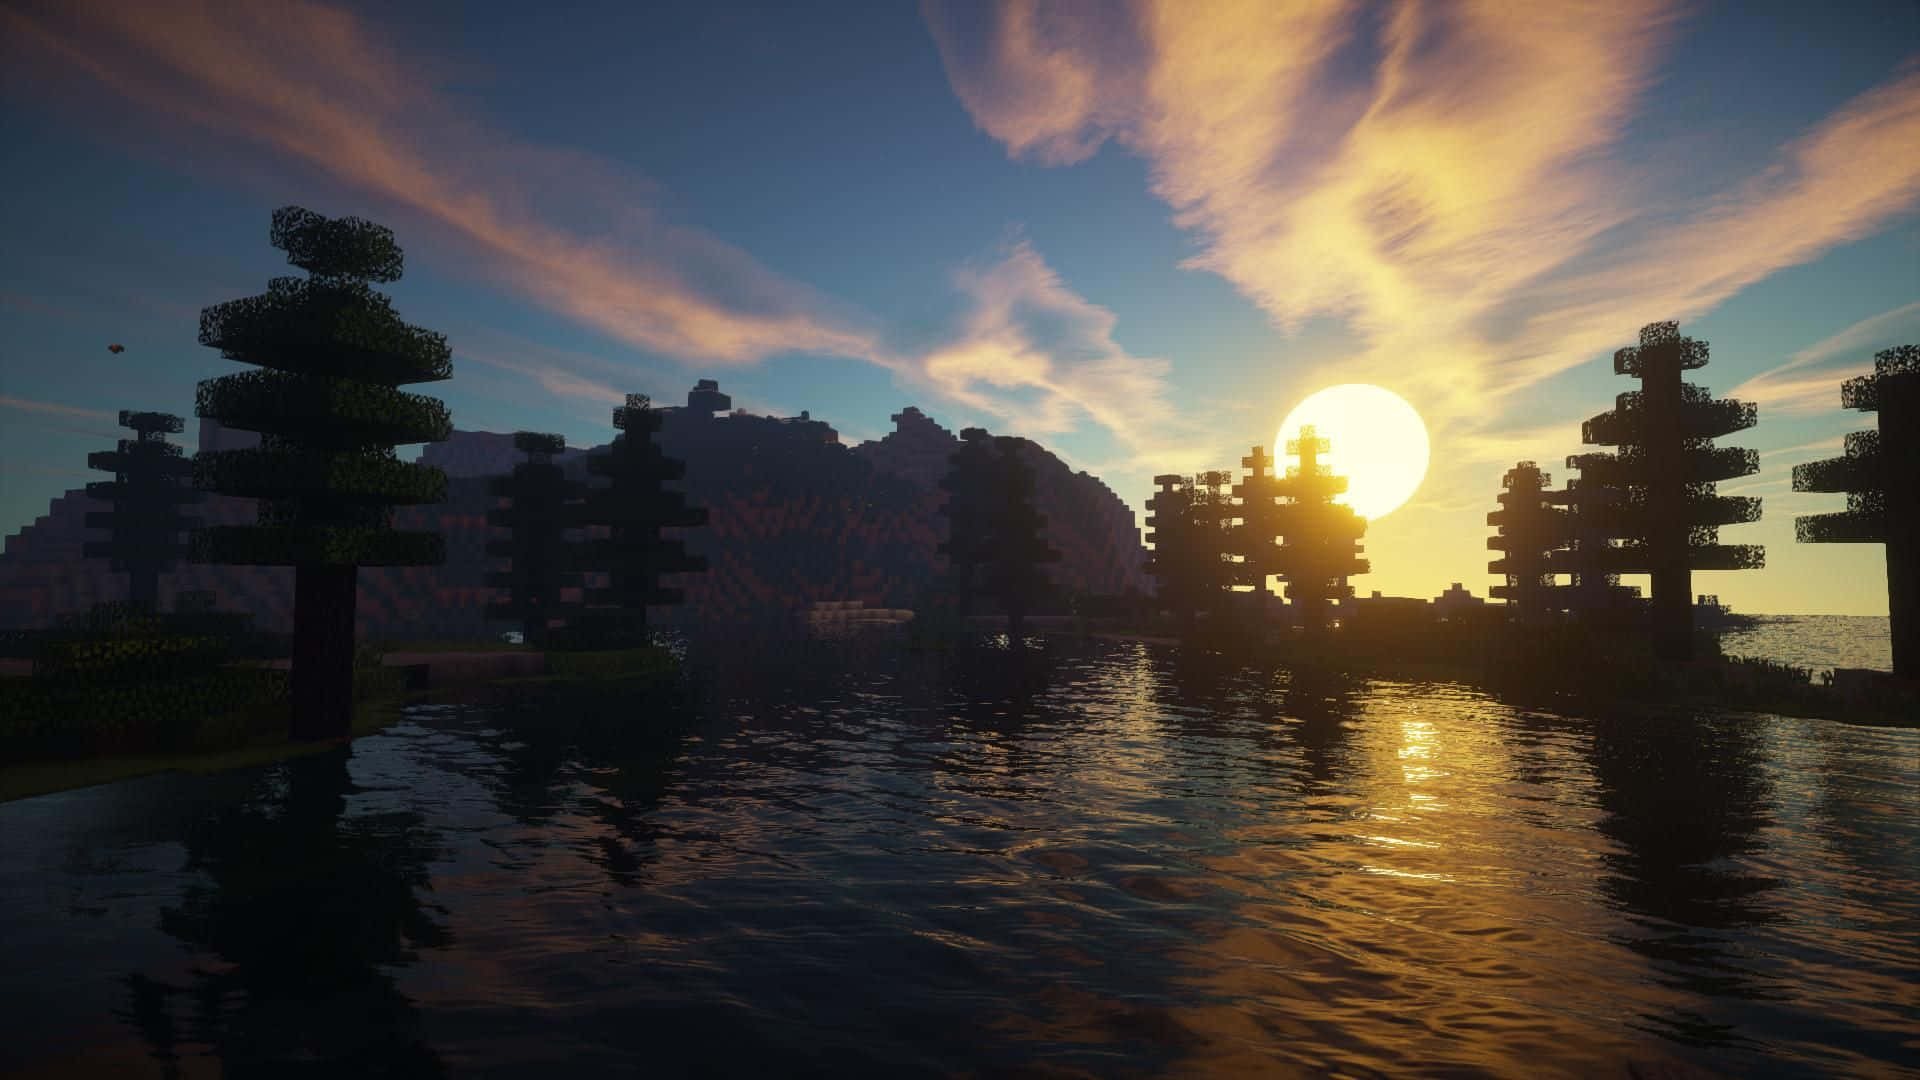 Capture the Beauty of Minecraft with Shaders" Wallpaper